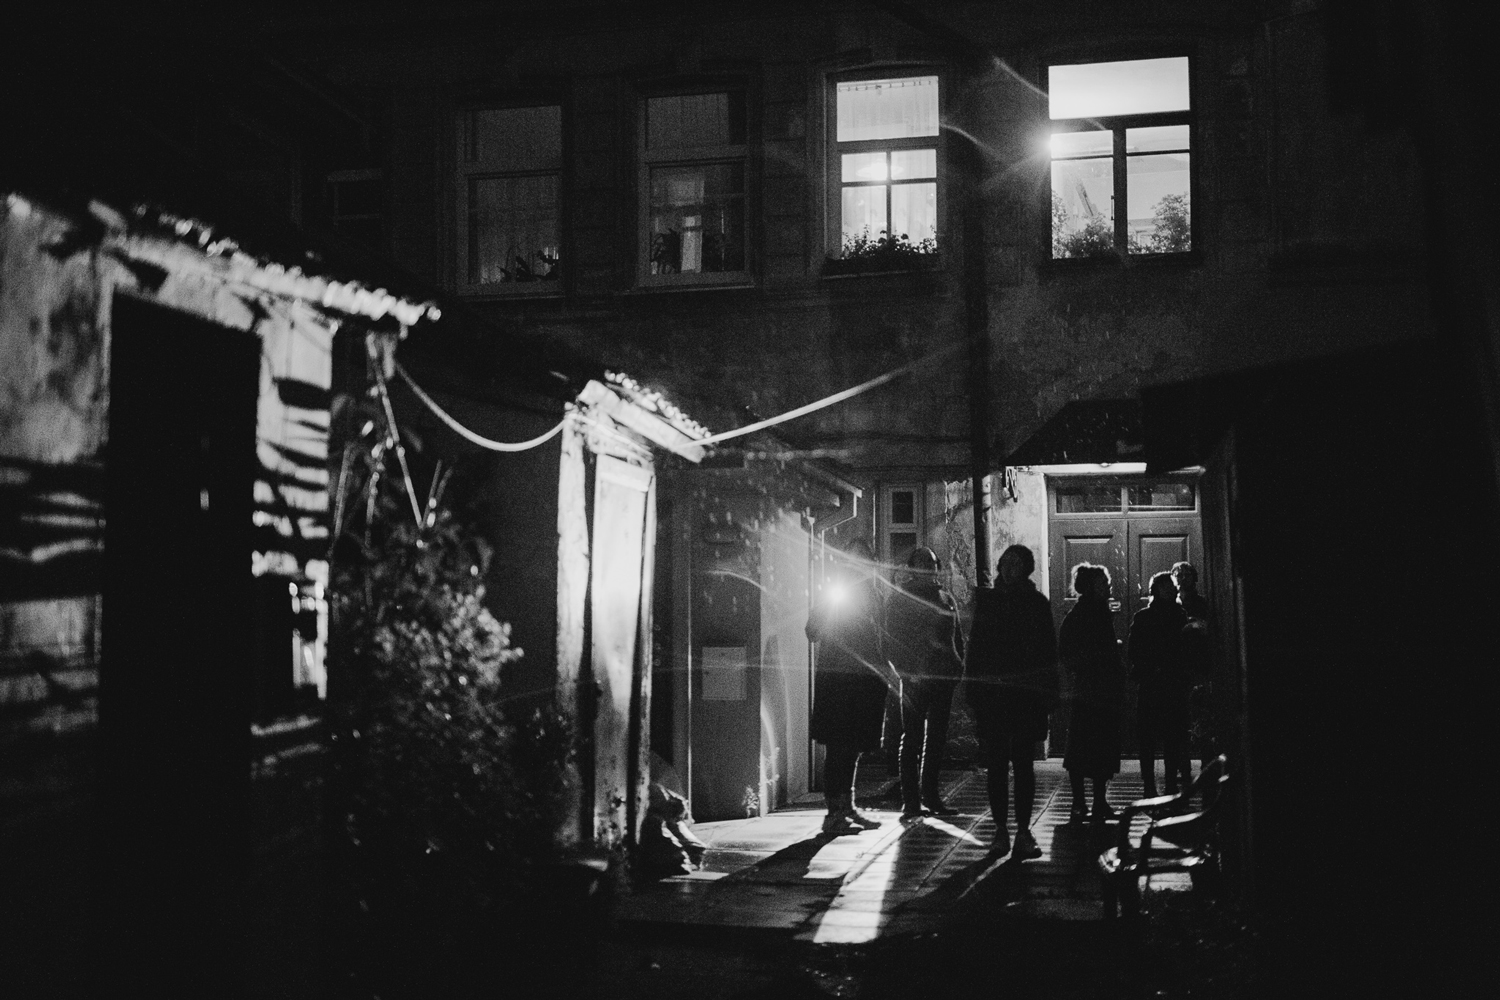 A sonic experience at the Vilna ghetto titled 